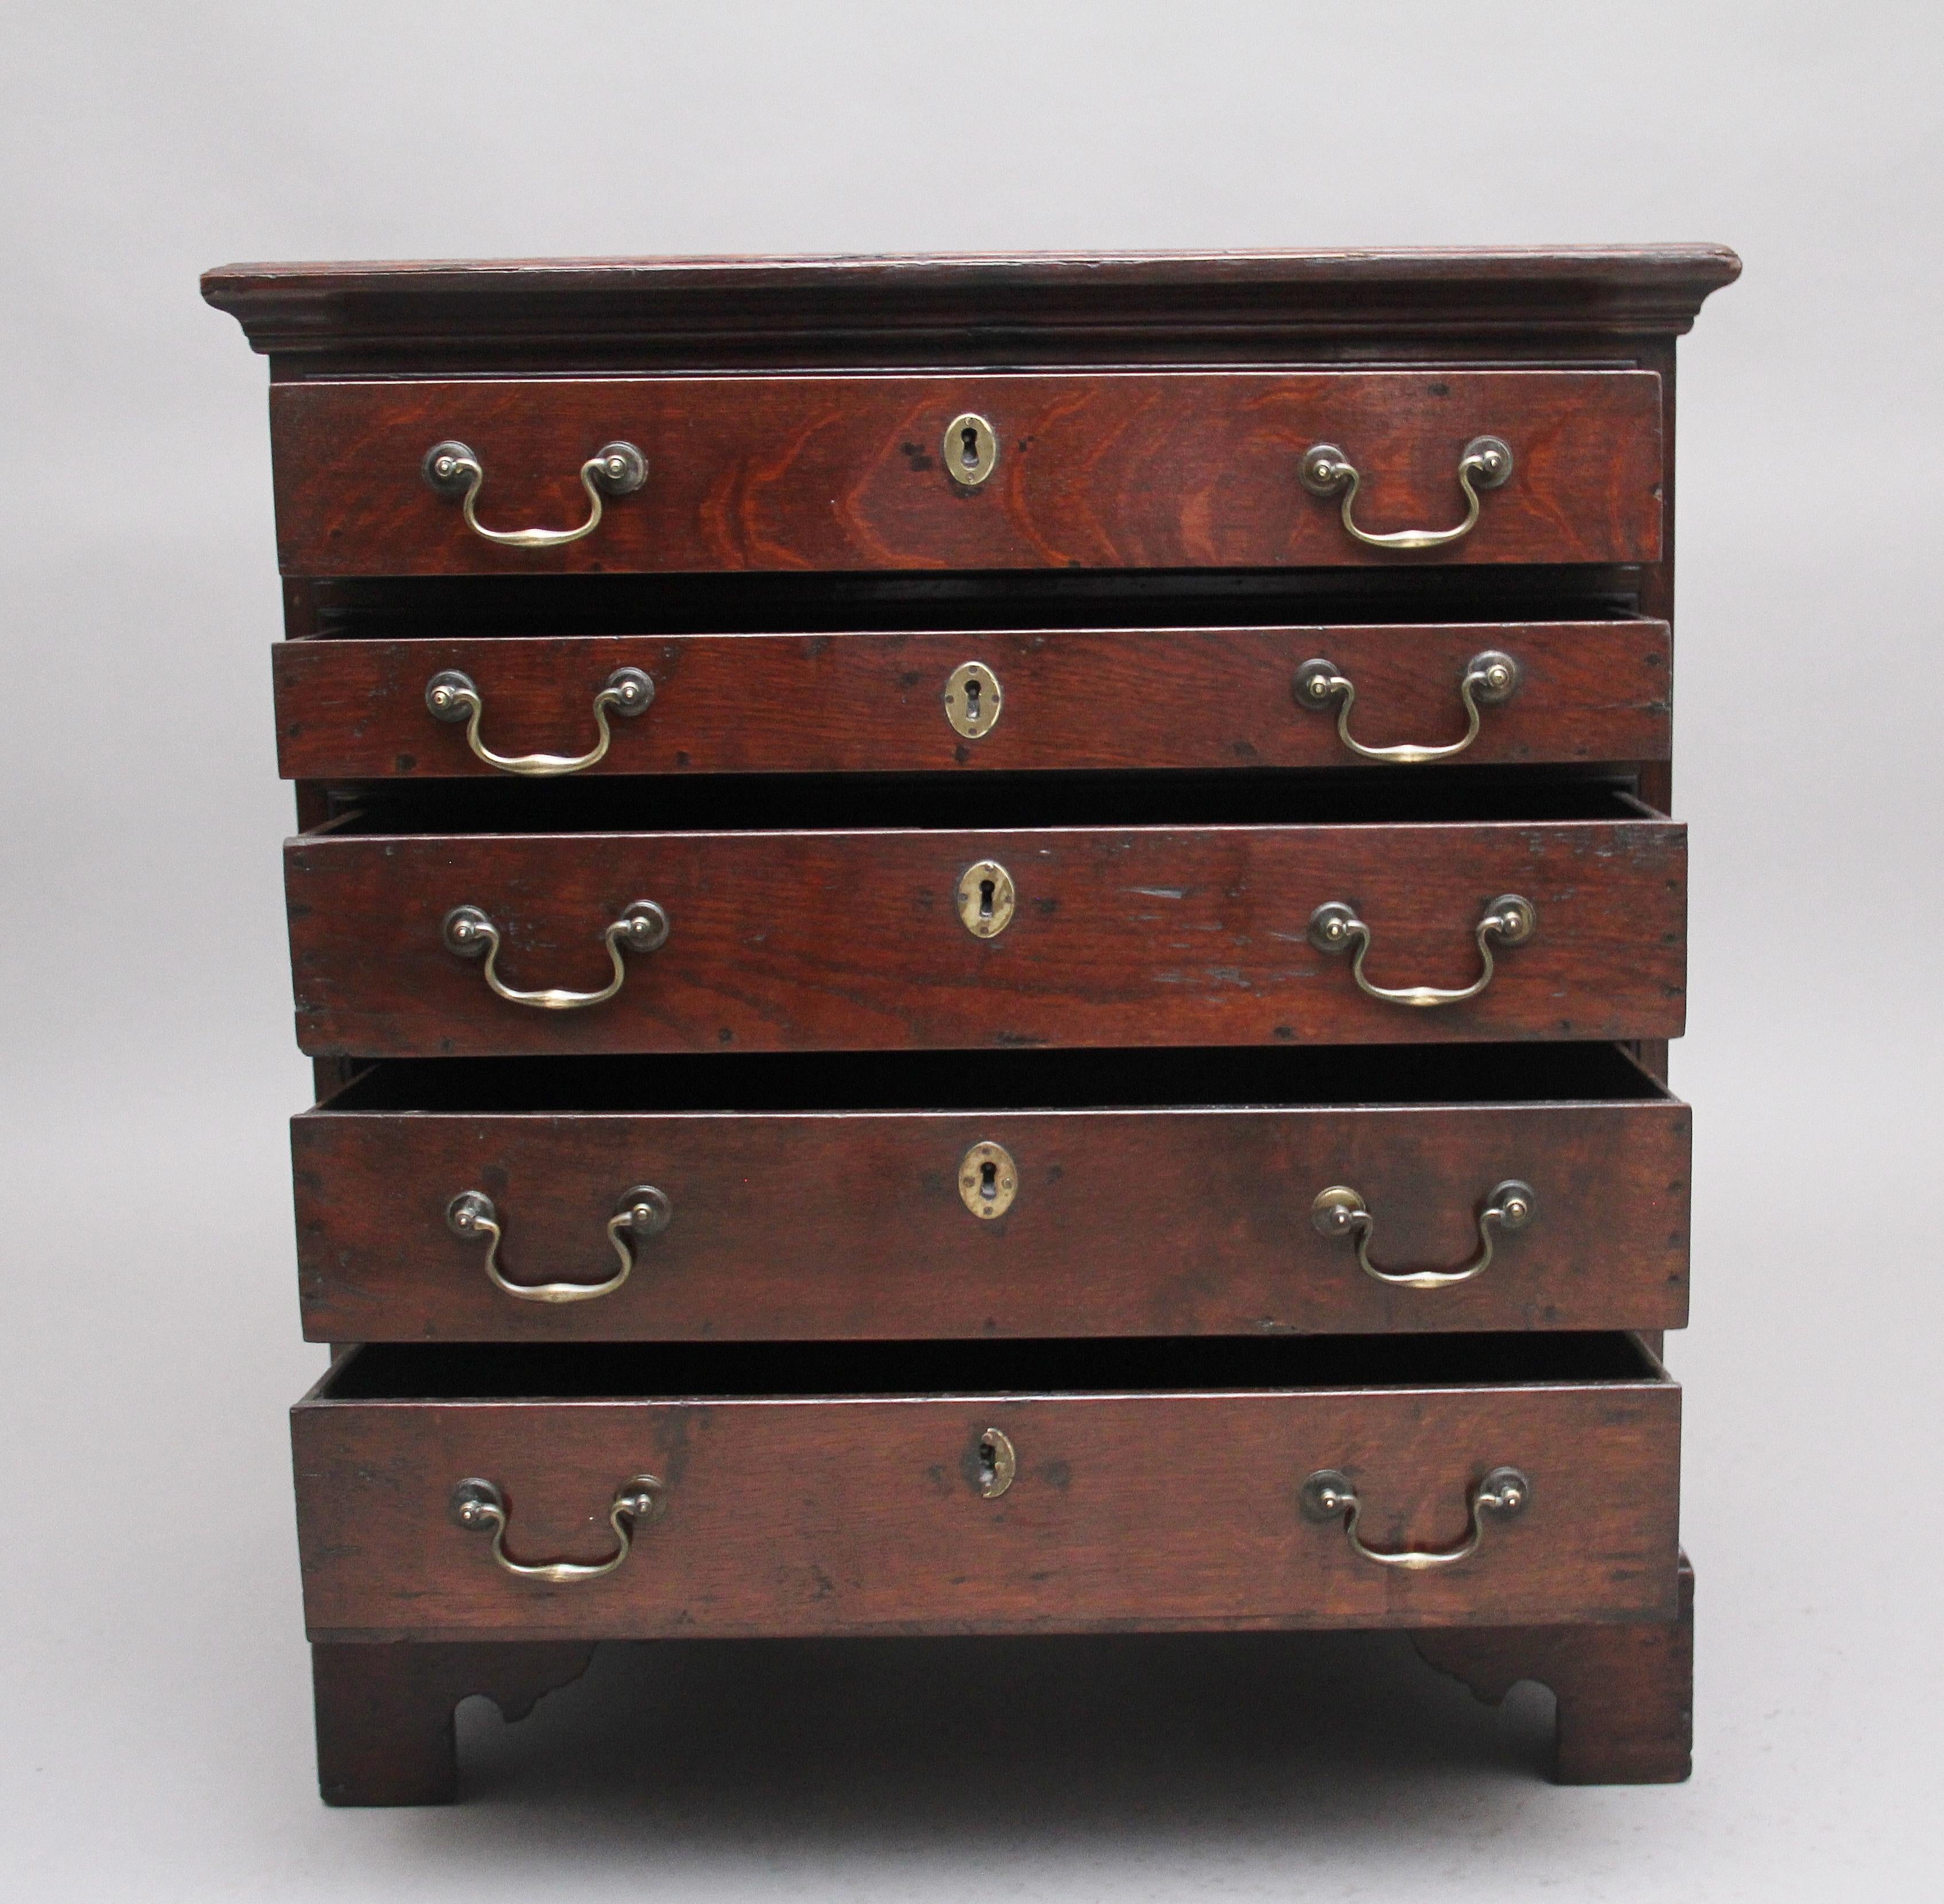 Mid 18th century oak chest of drawers, the double moulded edge top above a selection of five long drawers with brass swan neck handles and escutcheons, supported on bracket feet. Having a lovely patina and in great condition. Circa 1770.